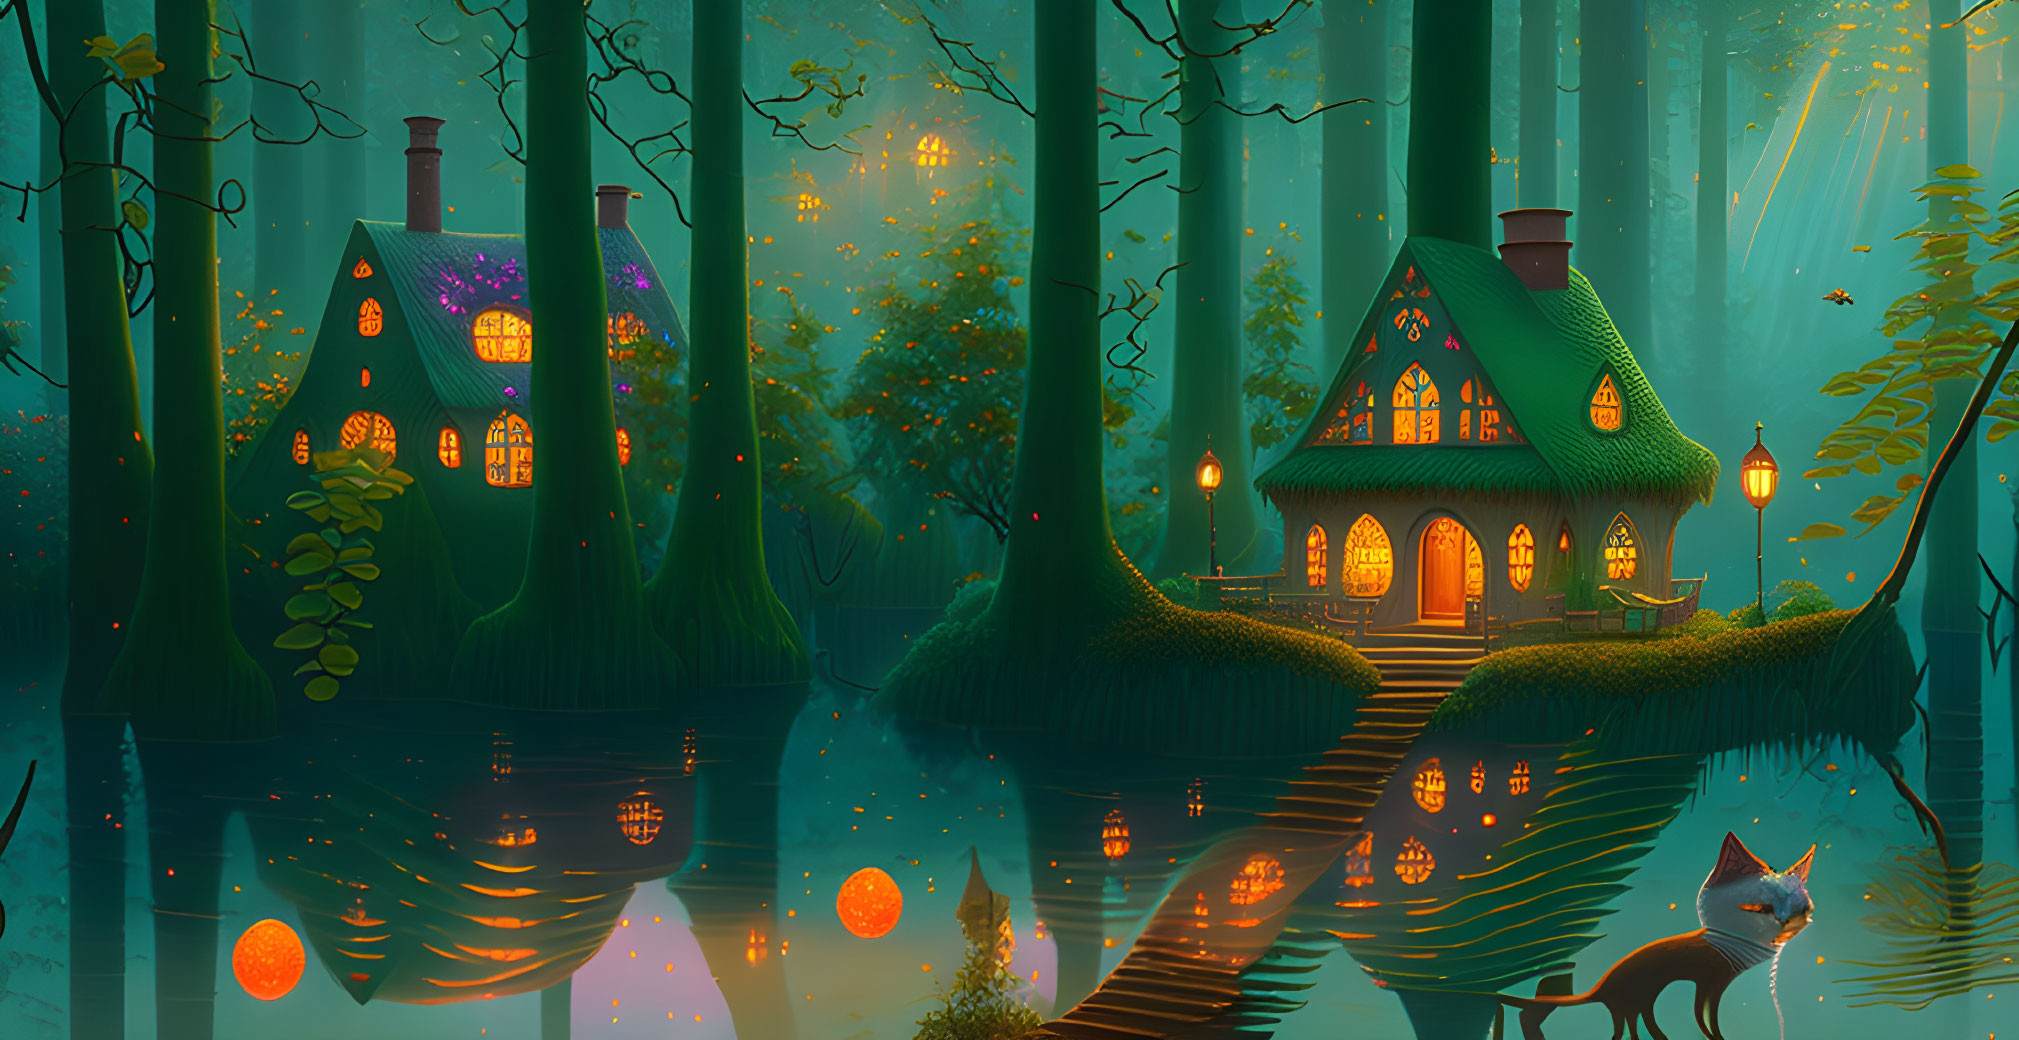 Mystical forest scene with cozy cottages, water reflections, fox, and fireflies